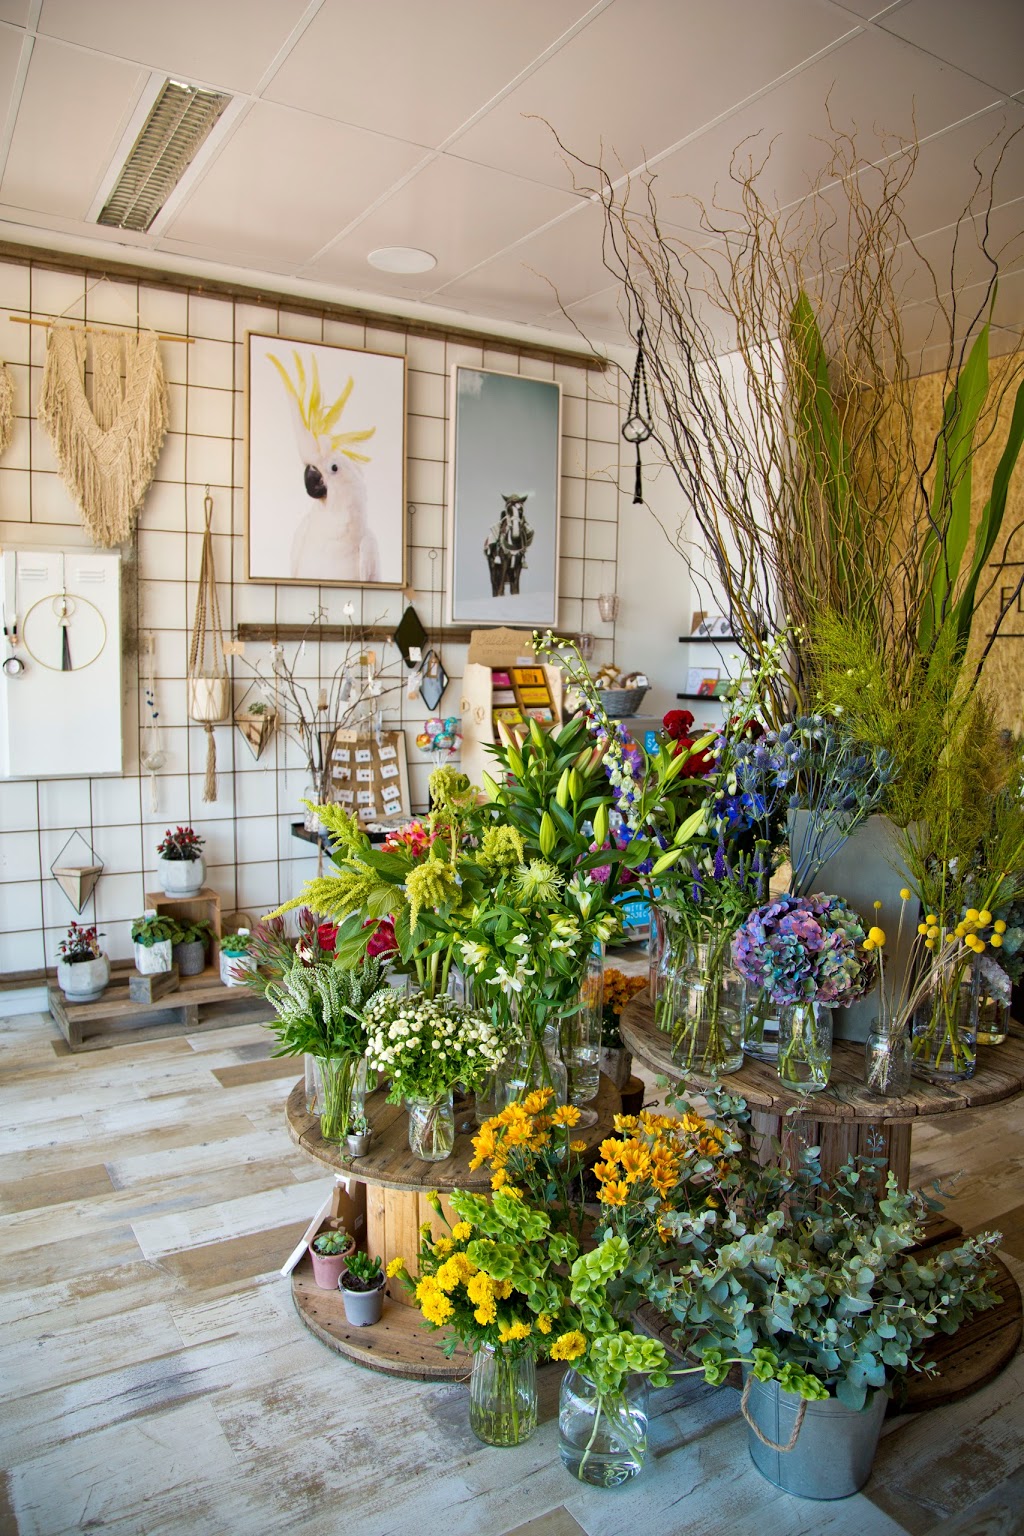 Flower Theory Florist And Gifts Lara Geelong | florist | Shop 2/16a The Centreway, Lara VIC 3212, Australia | 0352824977 OR +61 3 5282 4977